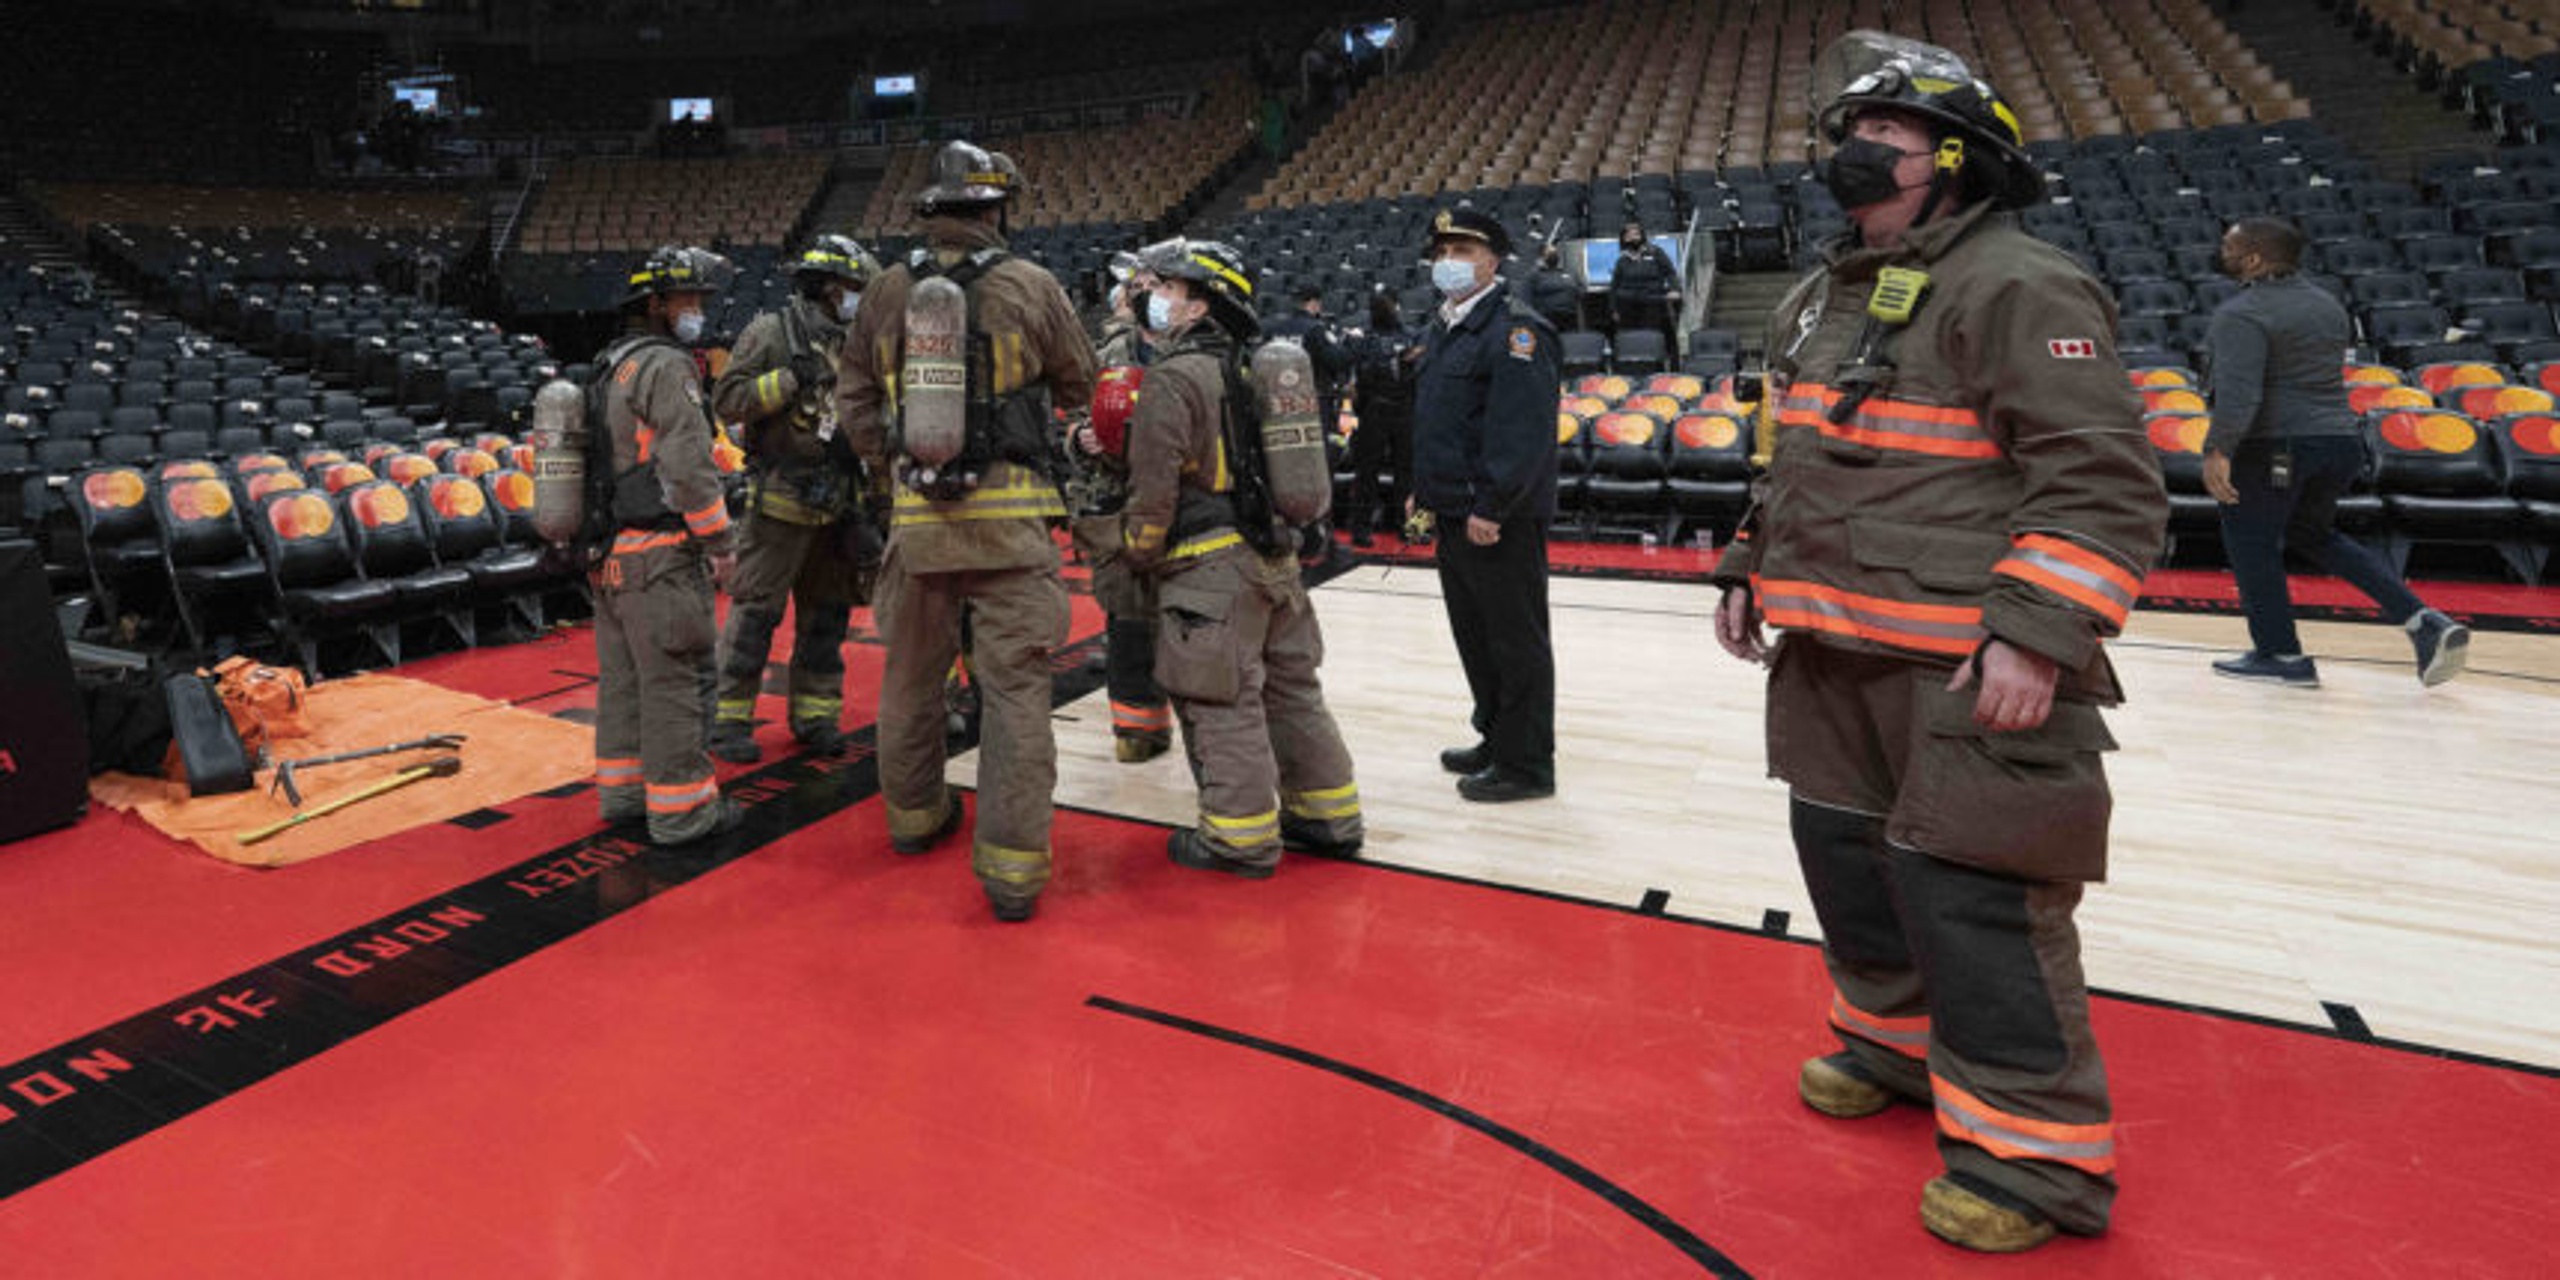 Raptors rout Pacers after fire causes delay, fan evacuation